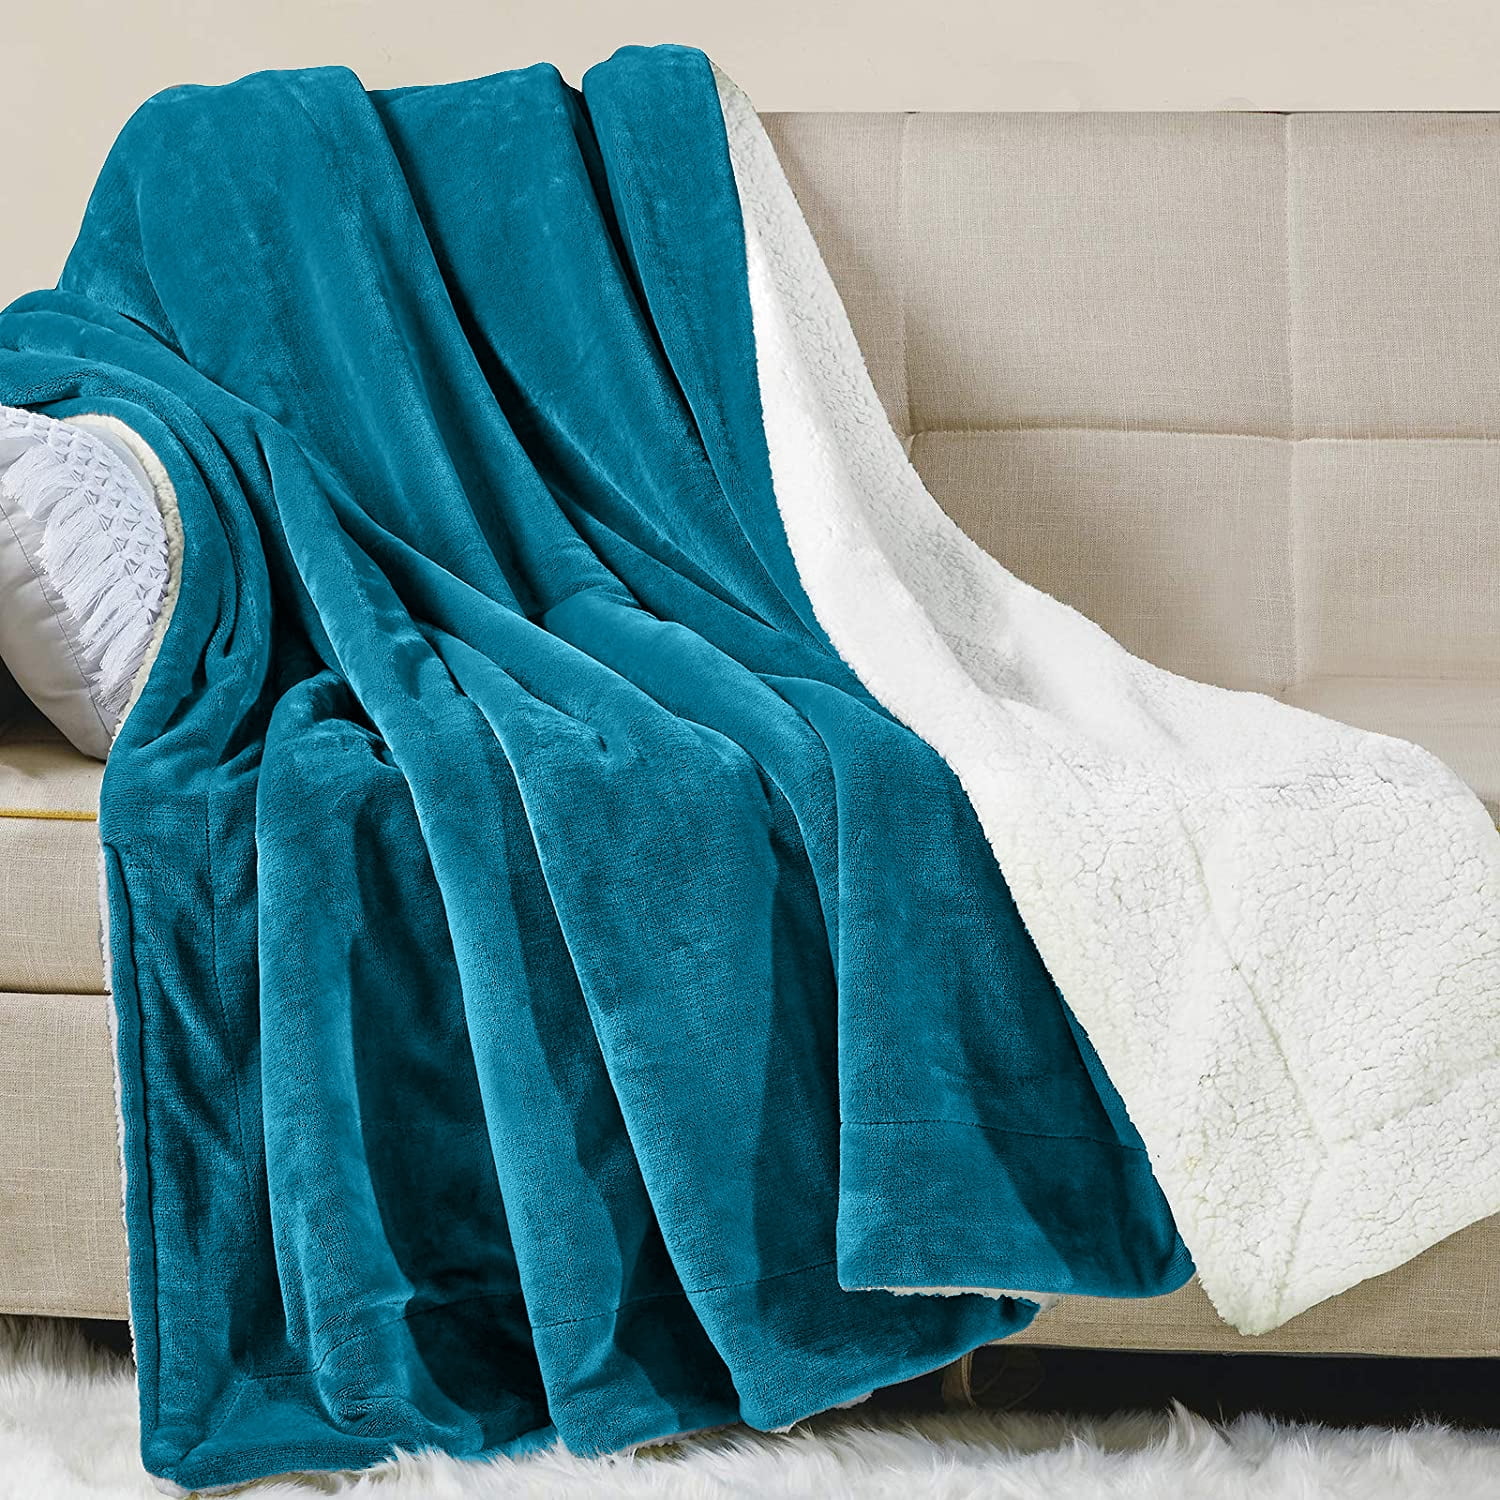 60 “x 70" New Open Package Mon Chateau Ultimate Plush Sherpa Throw Blue 